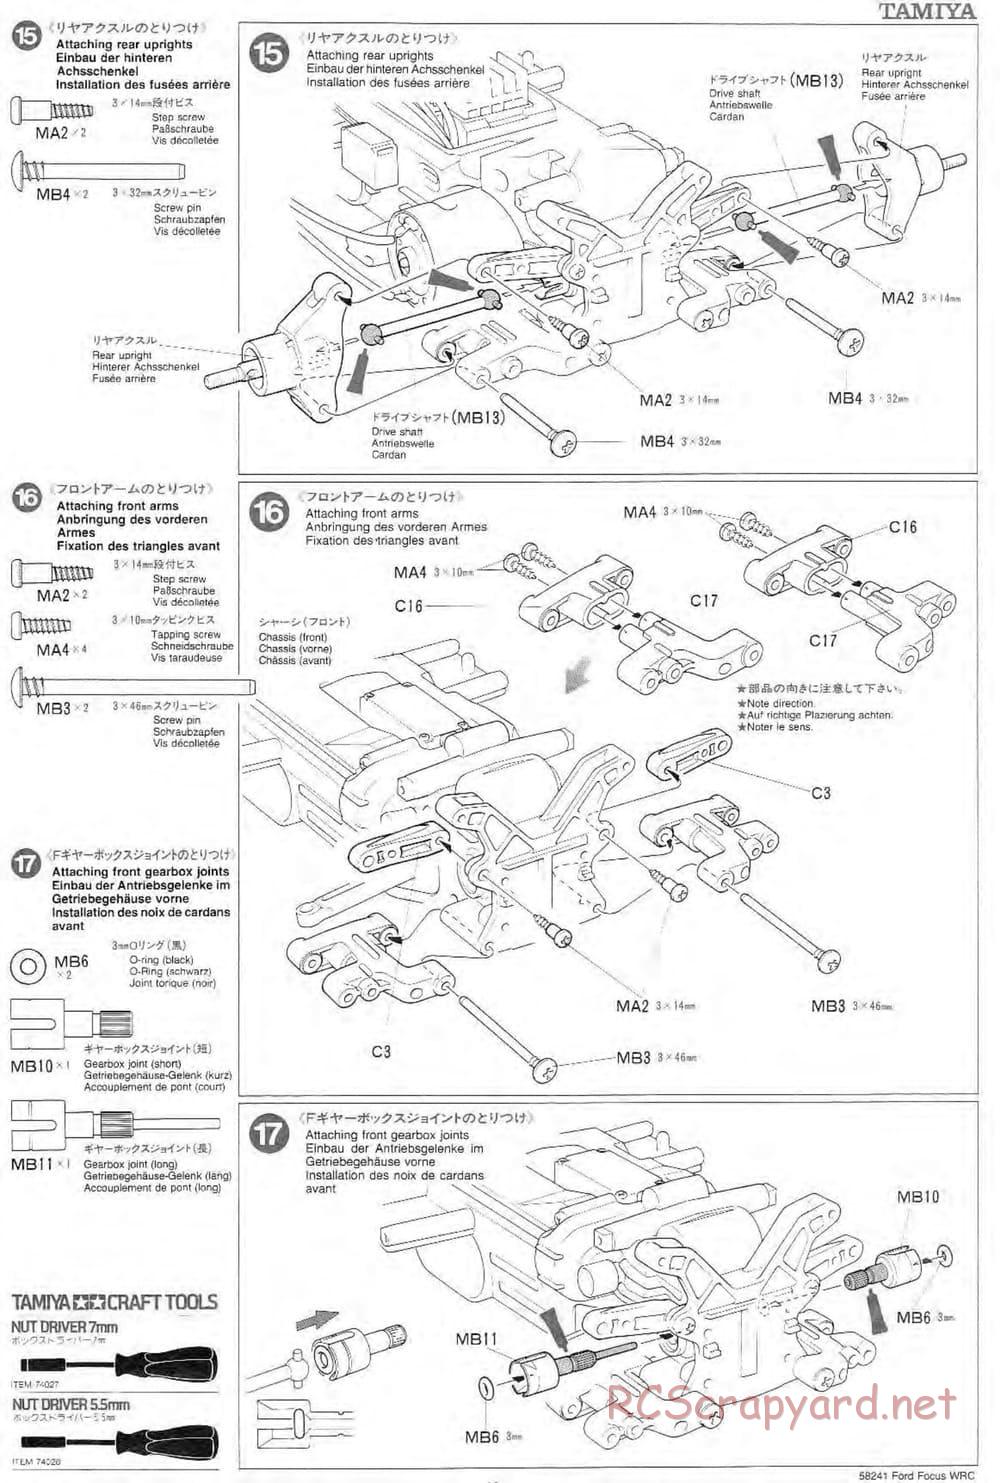 Tamiya - Ford Focus WRC - TL-01 Chassis - Manual - Page 11